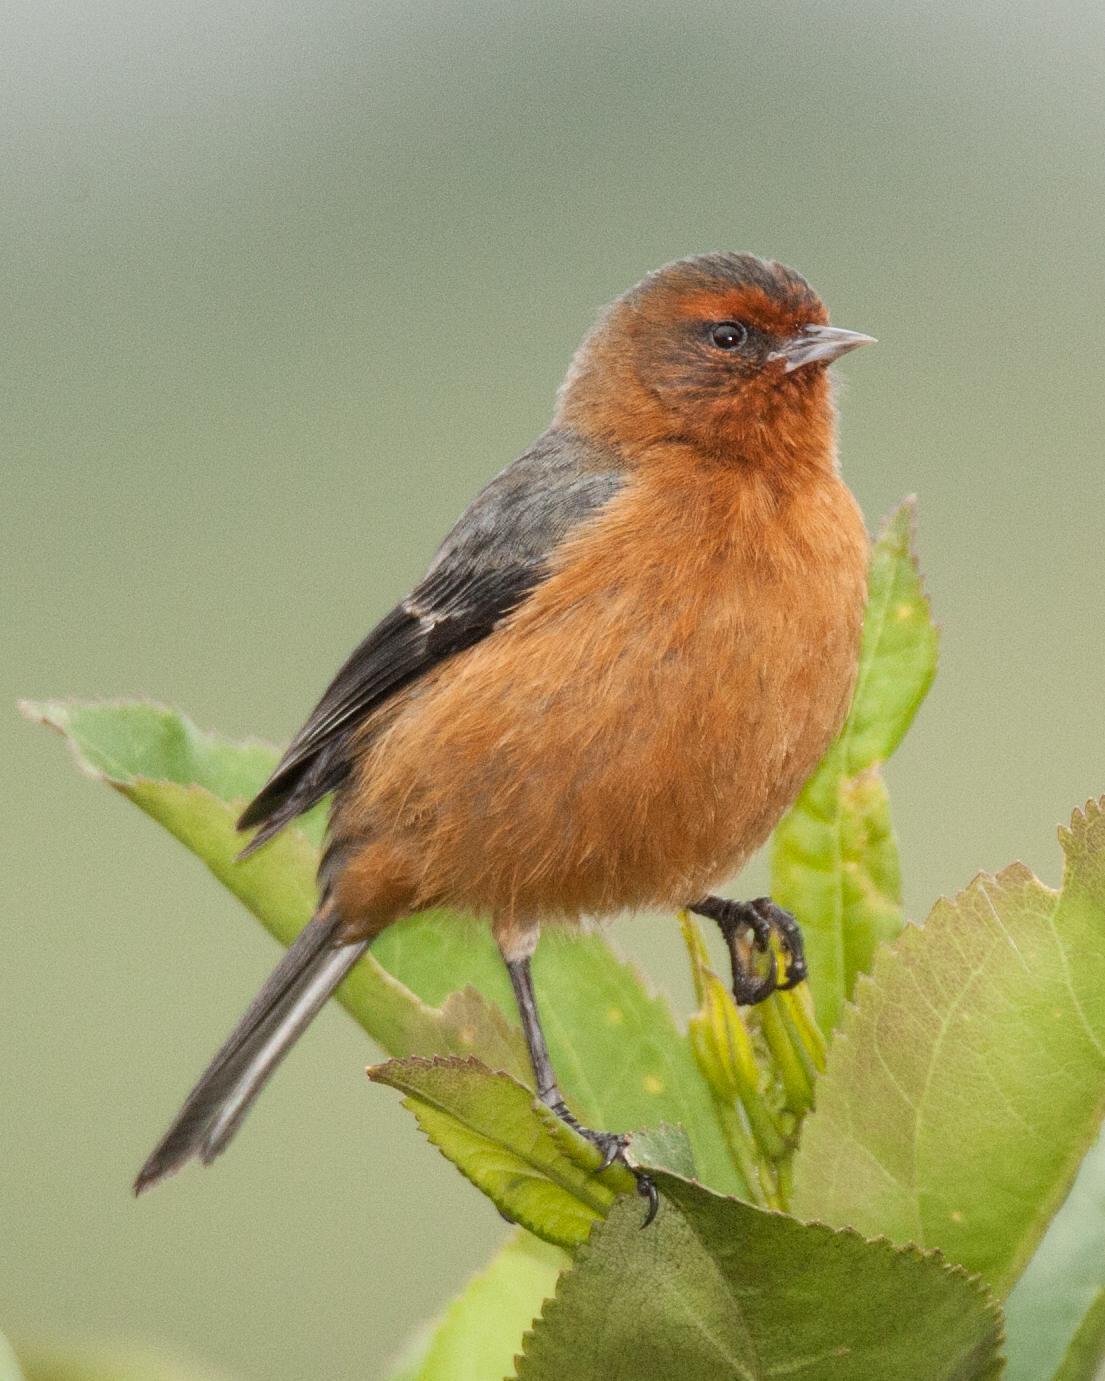 Rufous-browed Conebill Photo by Robert Lewis